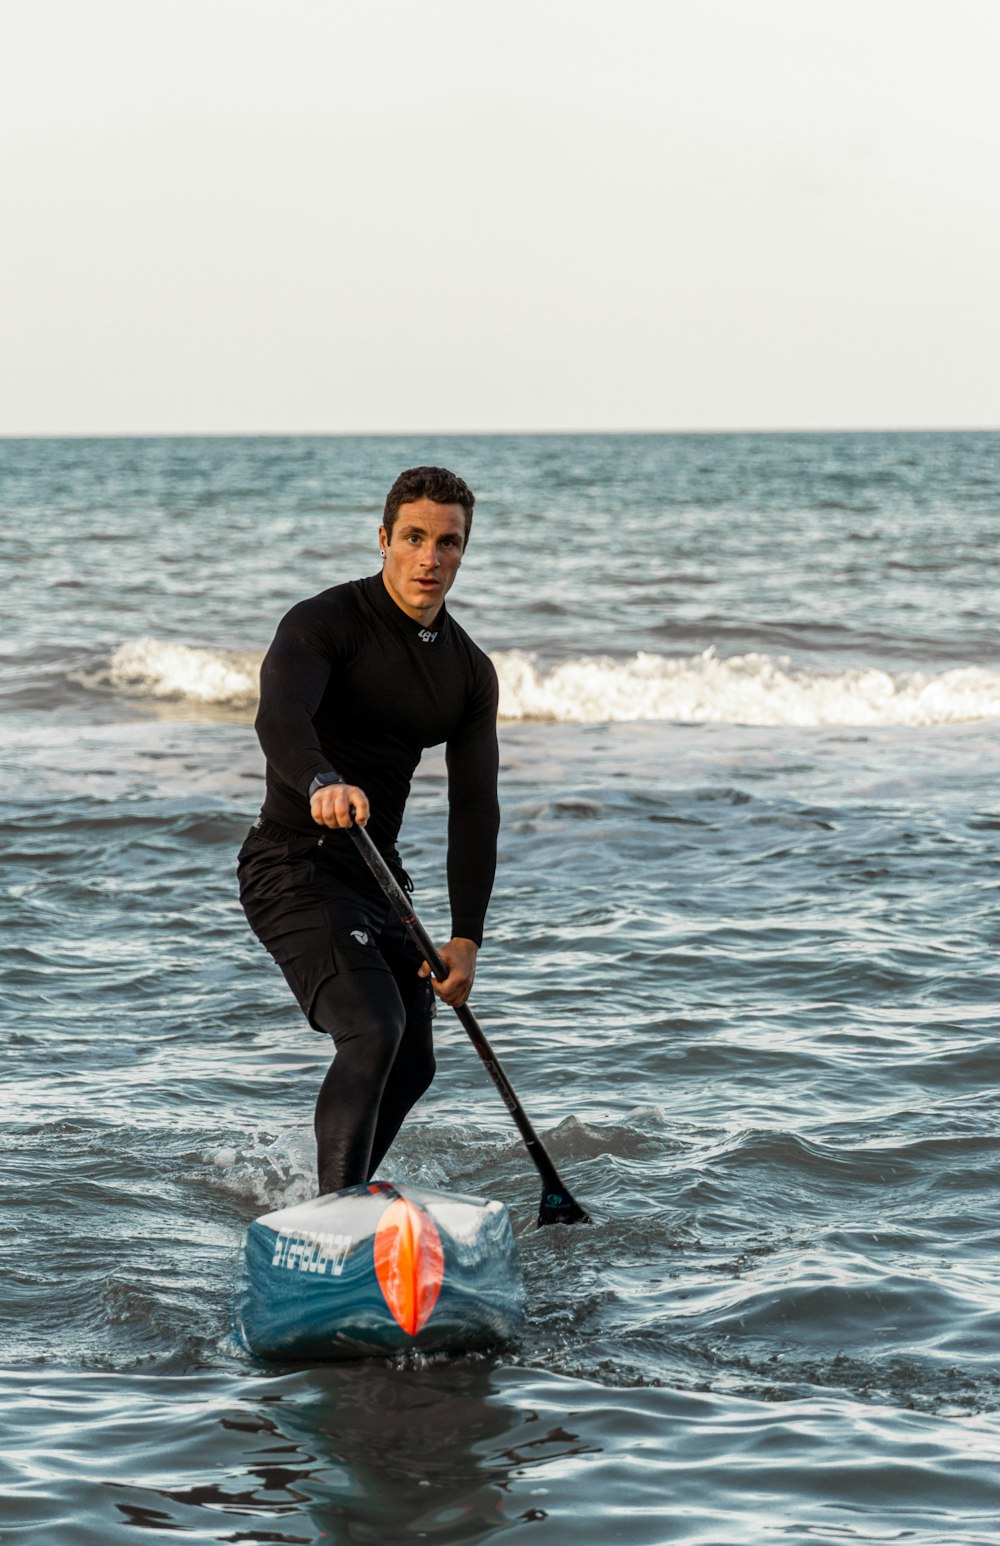 a man standing on a surfboard in the ocean